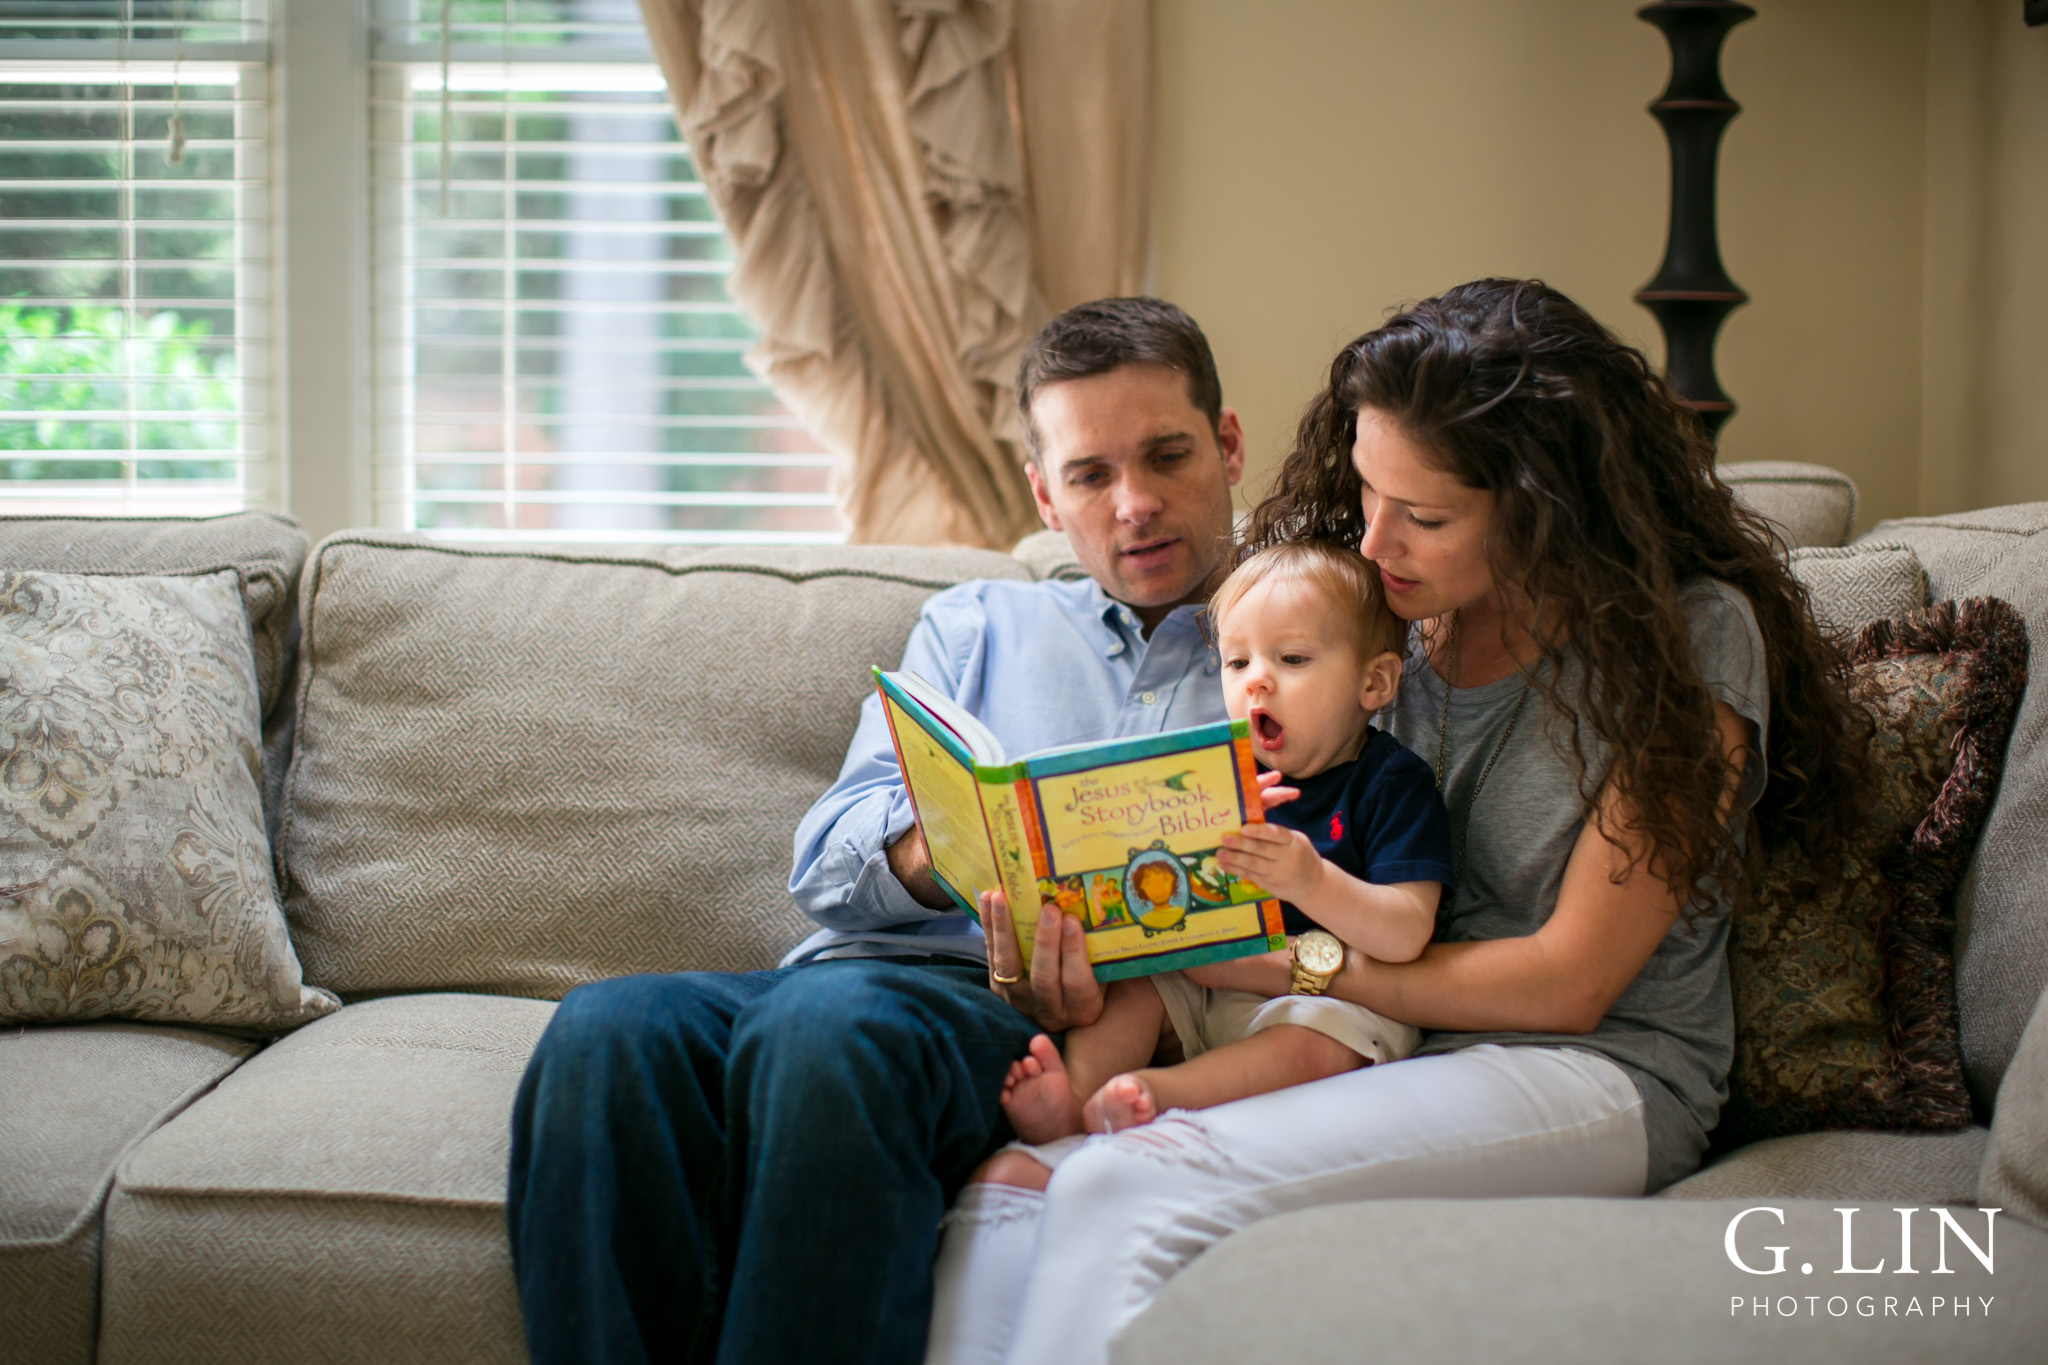 G. Lin Photography | Raleigh Lifestyle Photographer | Family of three reading Jesus storybook bible on couch